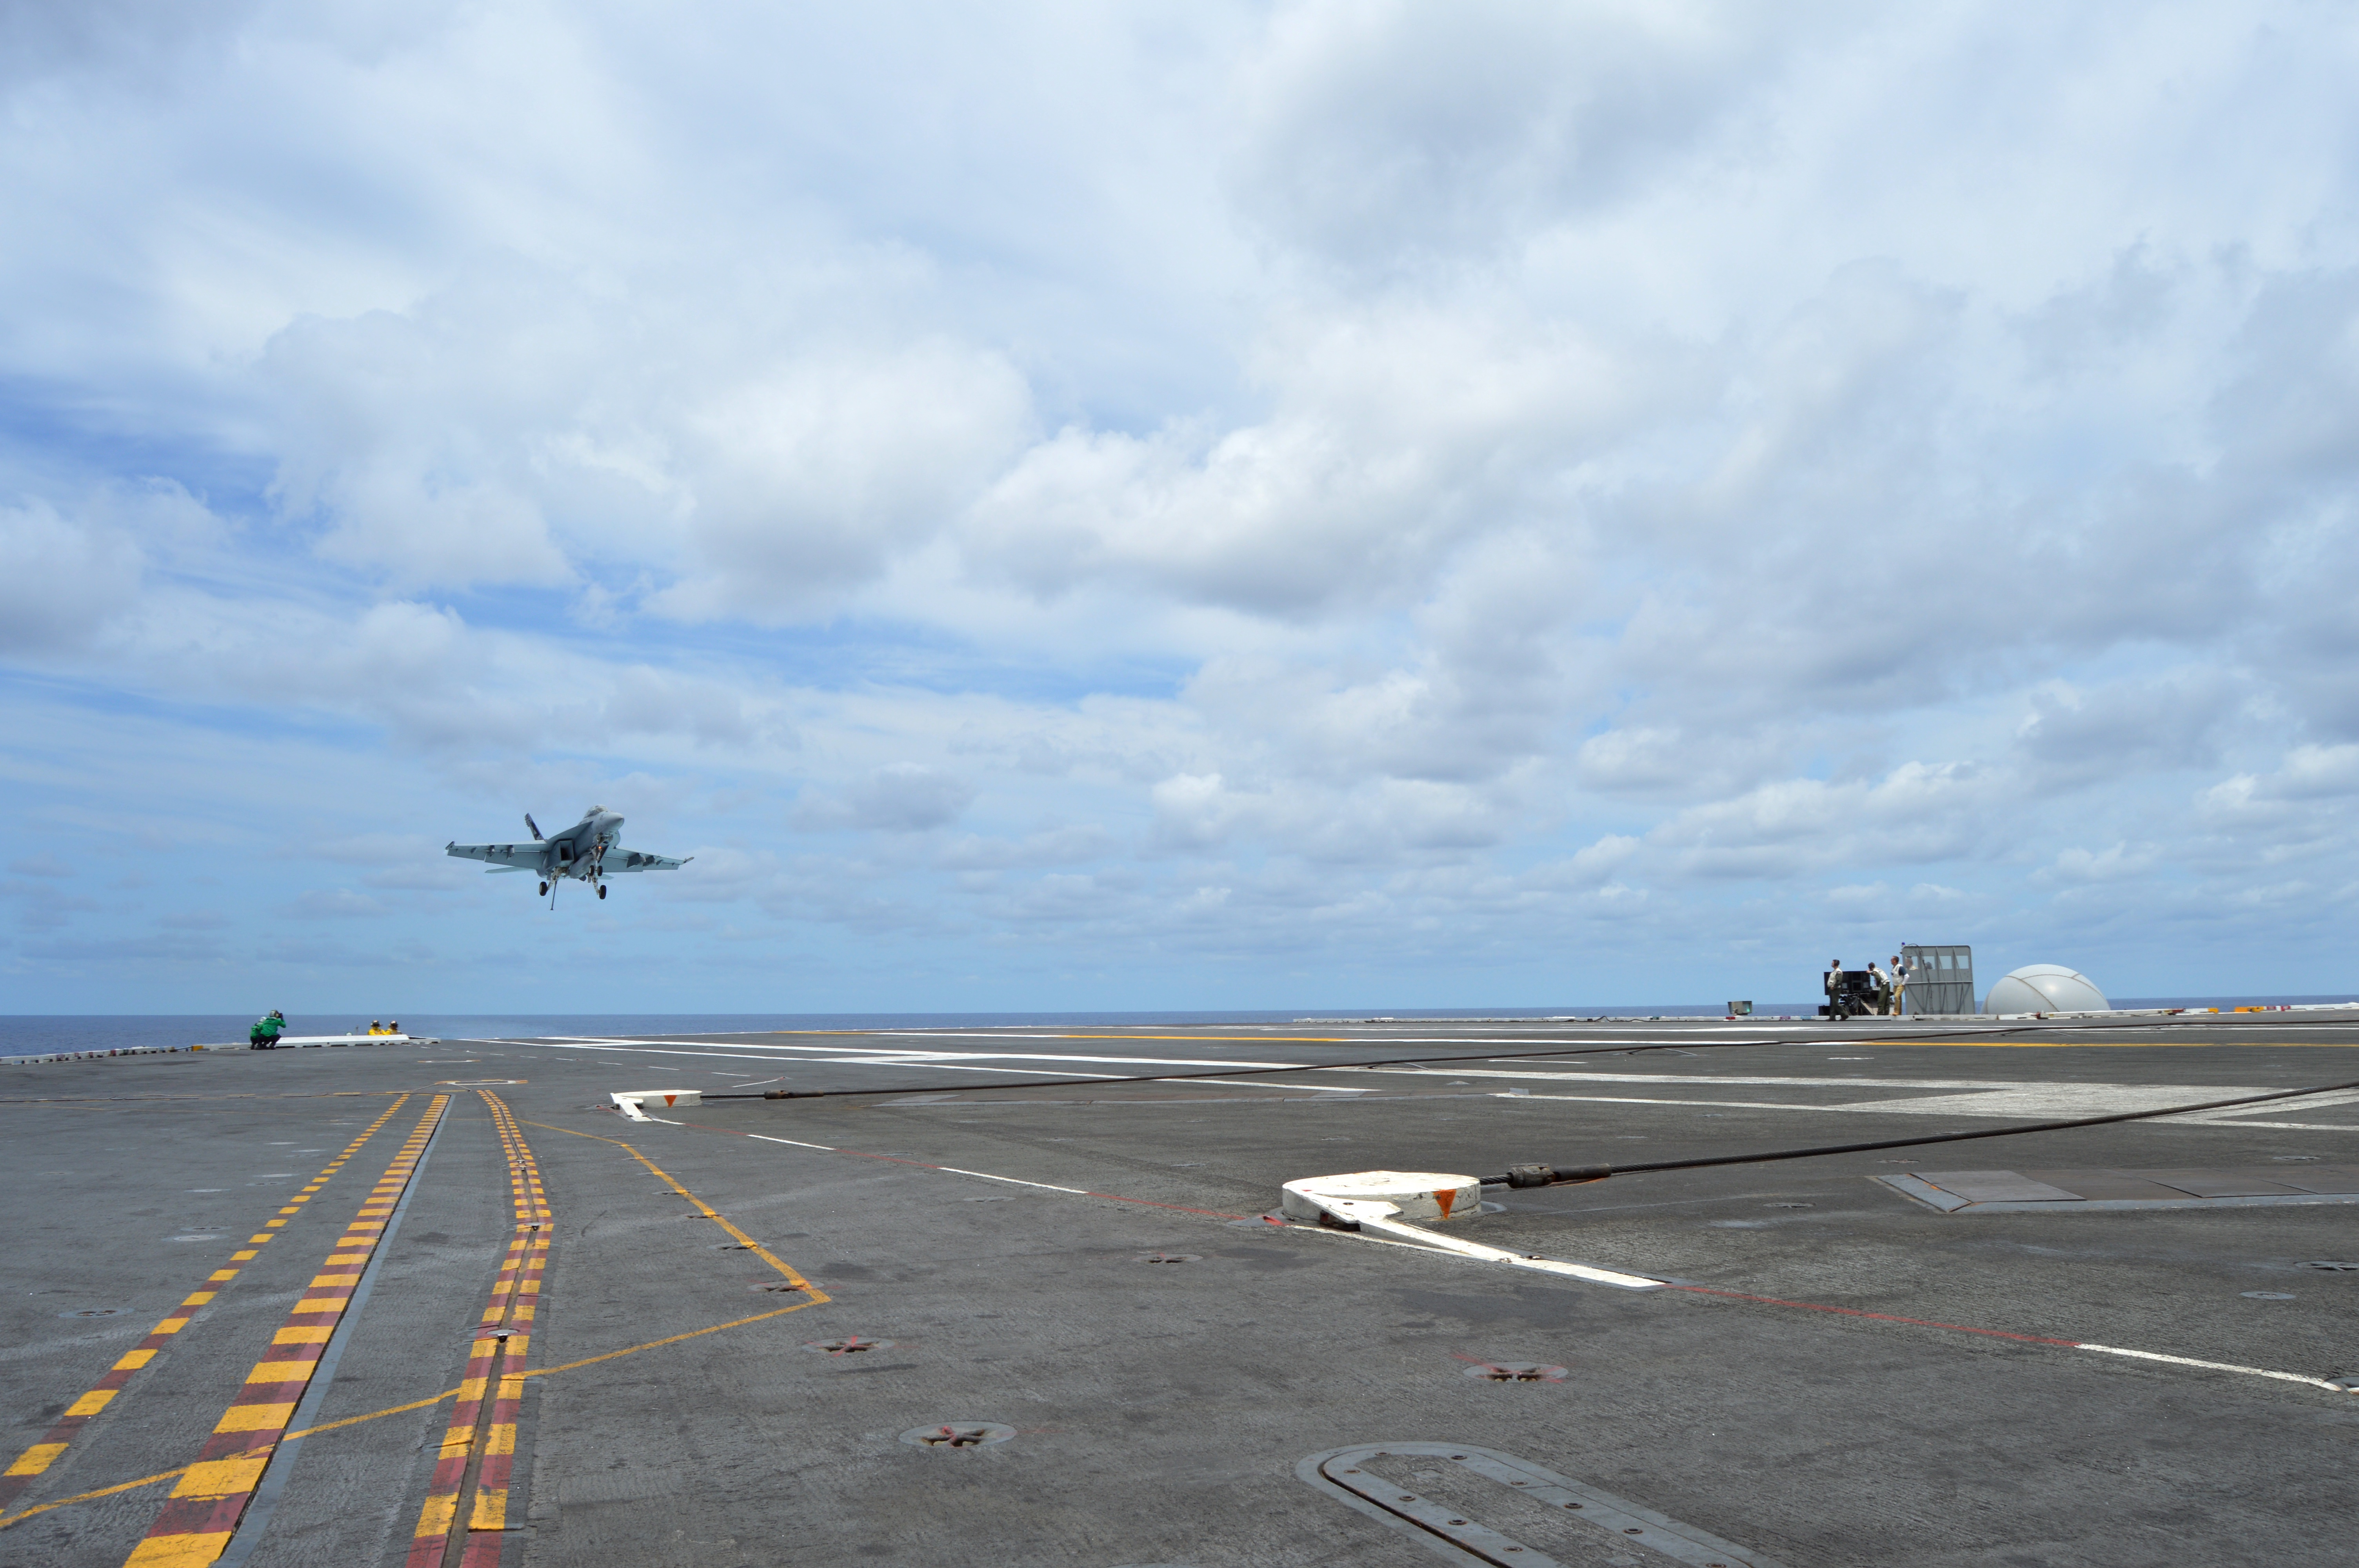 An F/A-18F Super Hornet in Air Test and Evaluation Squadron (VX) 23 comes in for an arrested landing on the deck of USS George Washington (CVN-73) on June 27, 2016, while testing the MAGIC CARPET carrier landing assistance technology. USNI News photo.